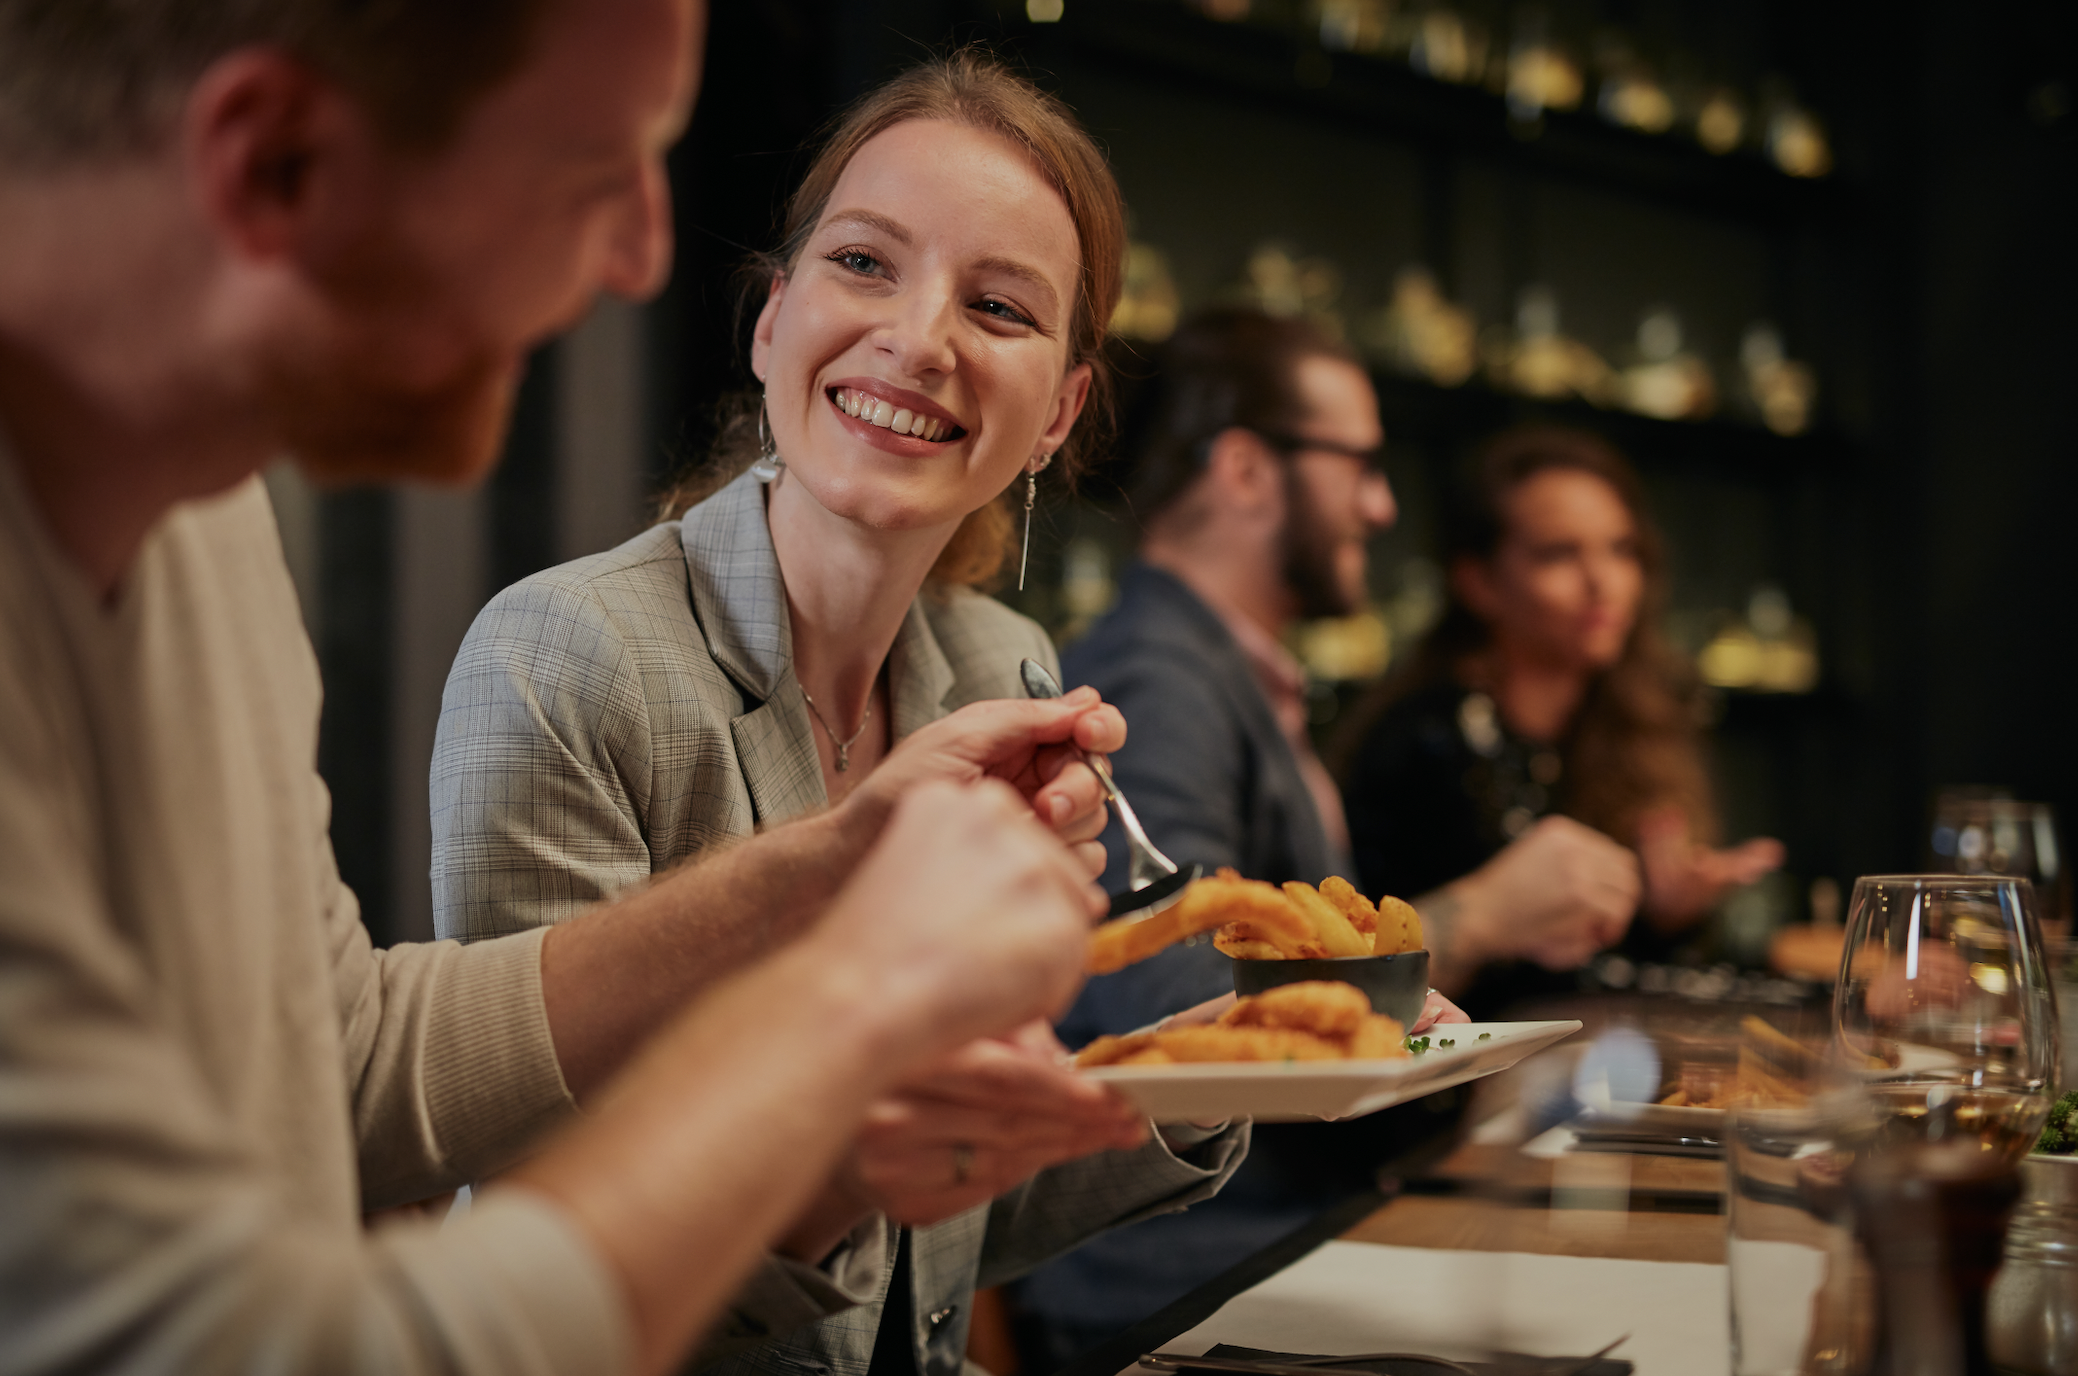 A young woman smiles to the man in the restaurant | Source: Shutterstock